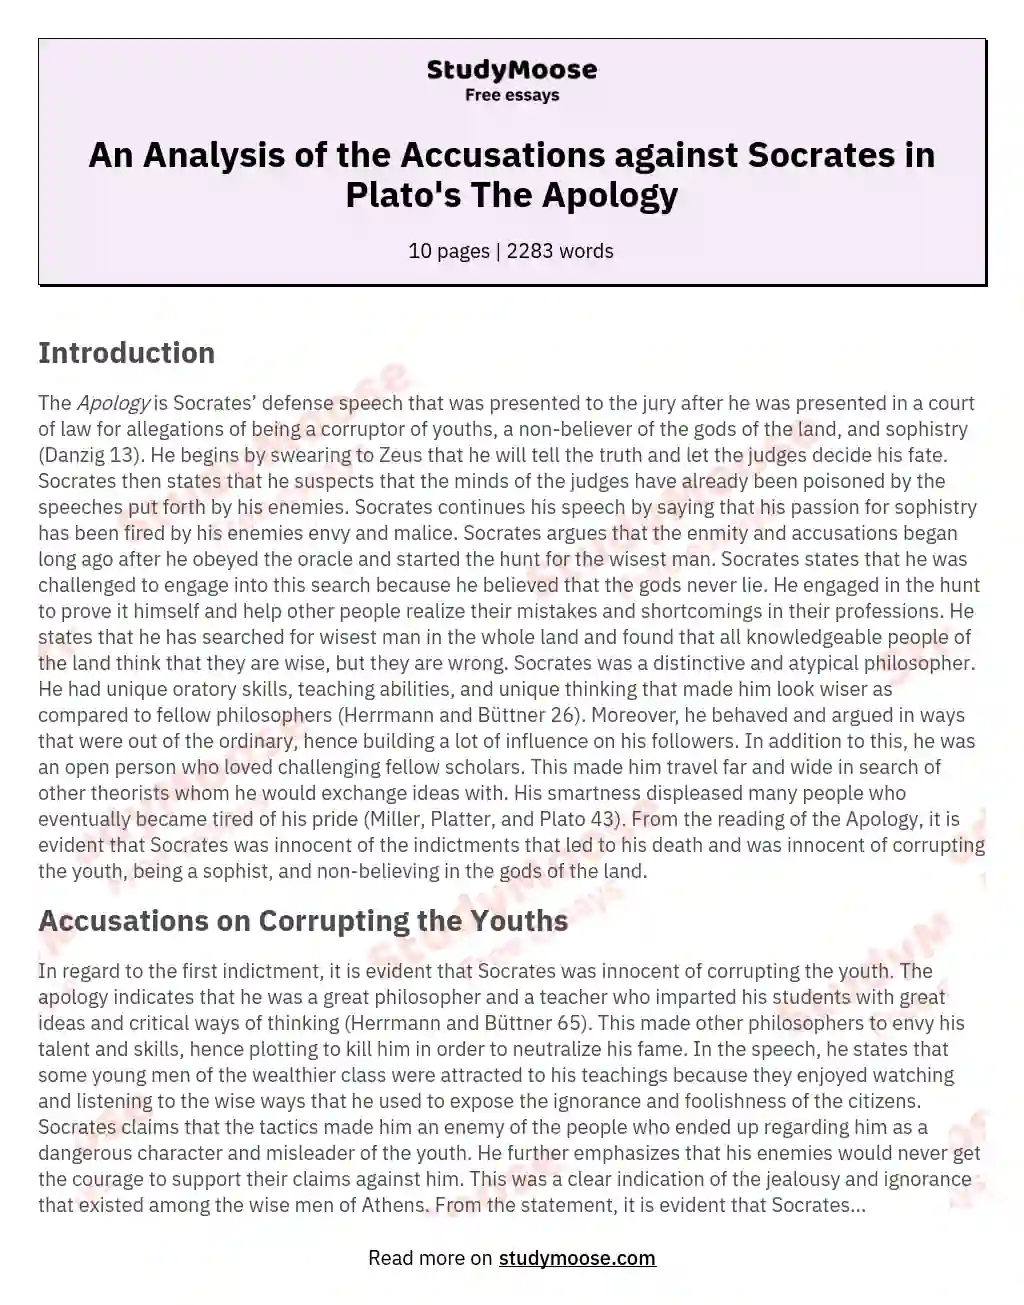 An Analysis of the Accusations against Socrates in Plato's The Apology